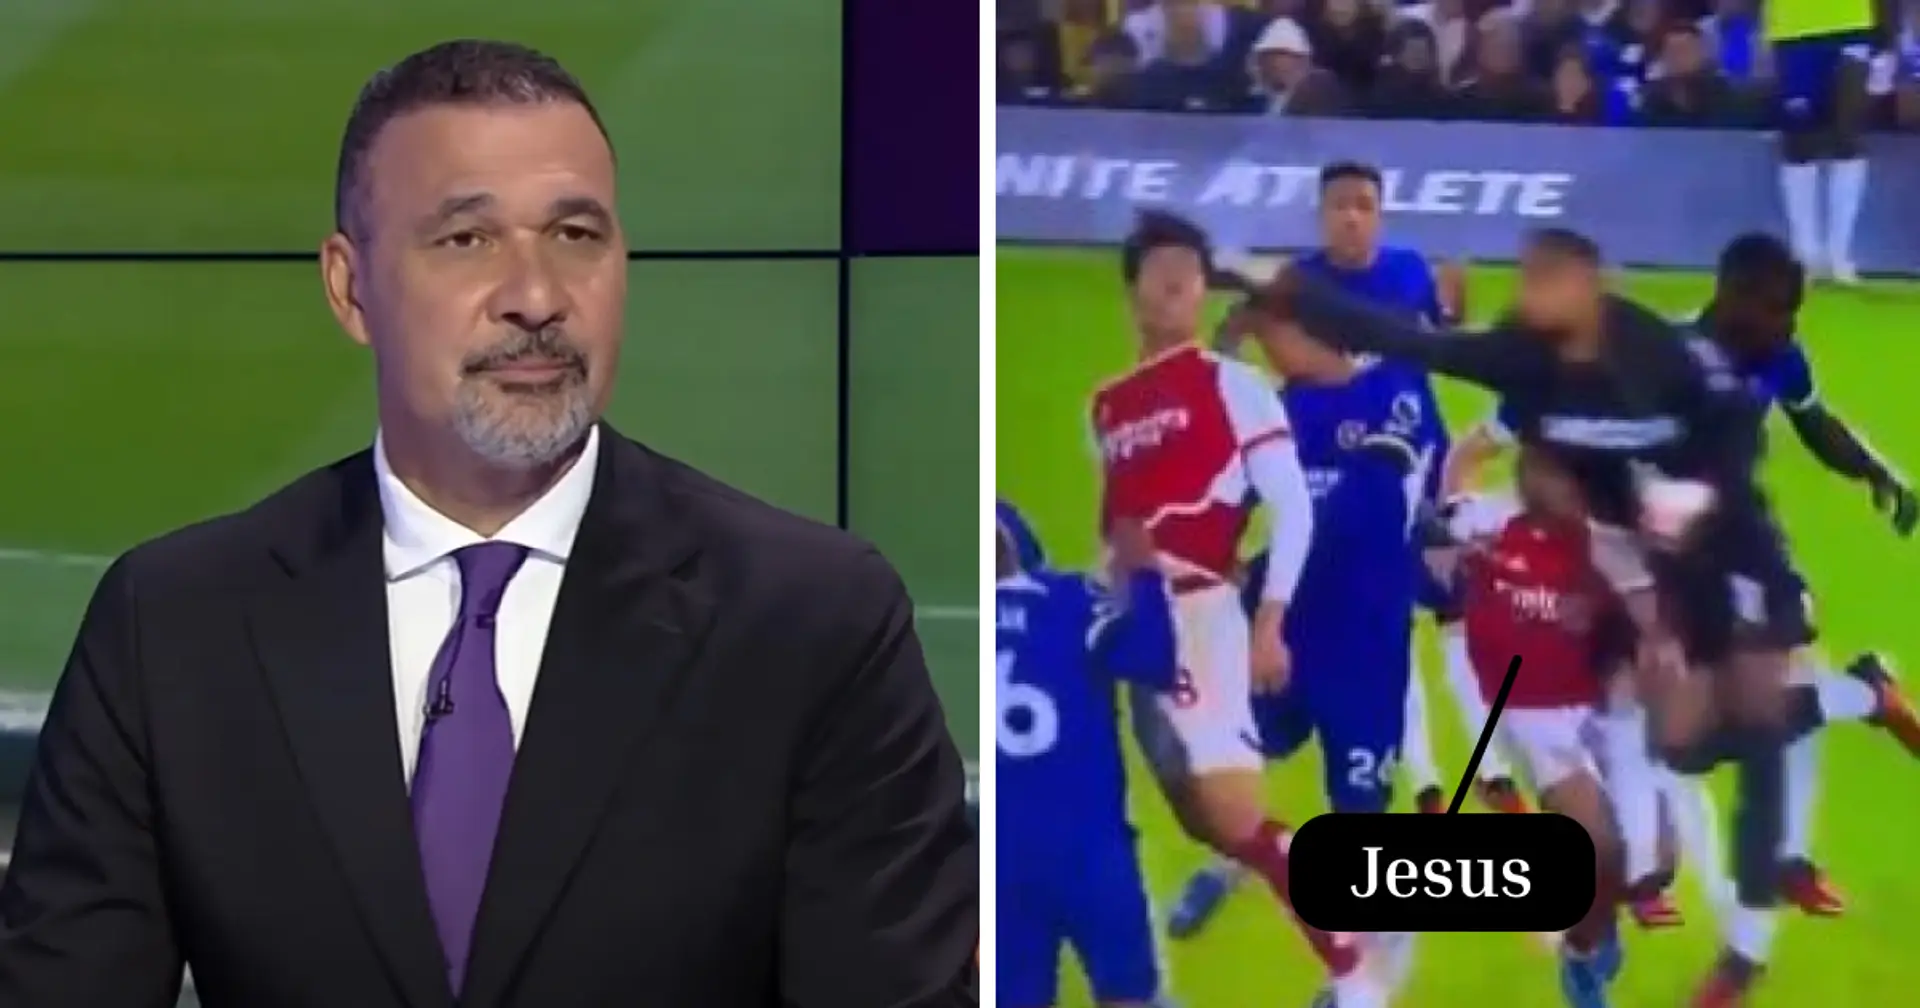 'I can’t understand.This is a penalty': Ruud Gullit and Ian Wright on Sanzhez's foul against Jesus